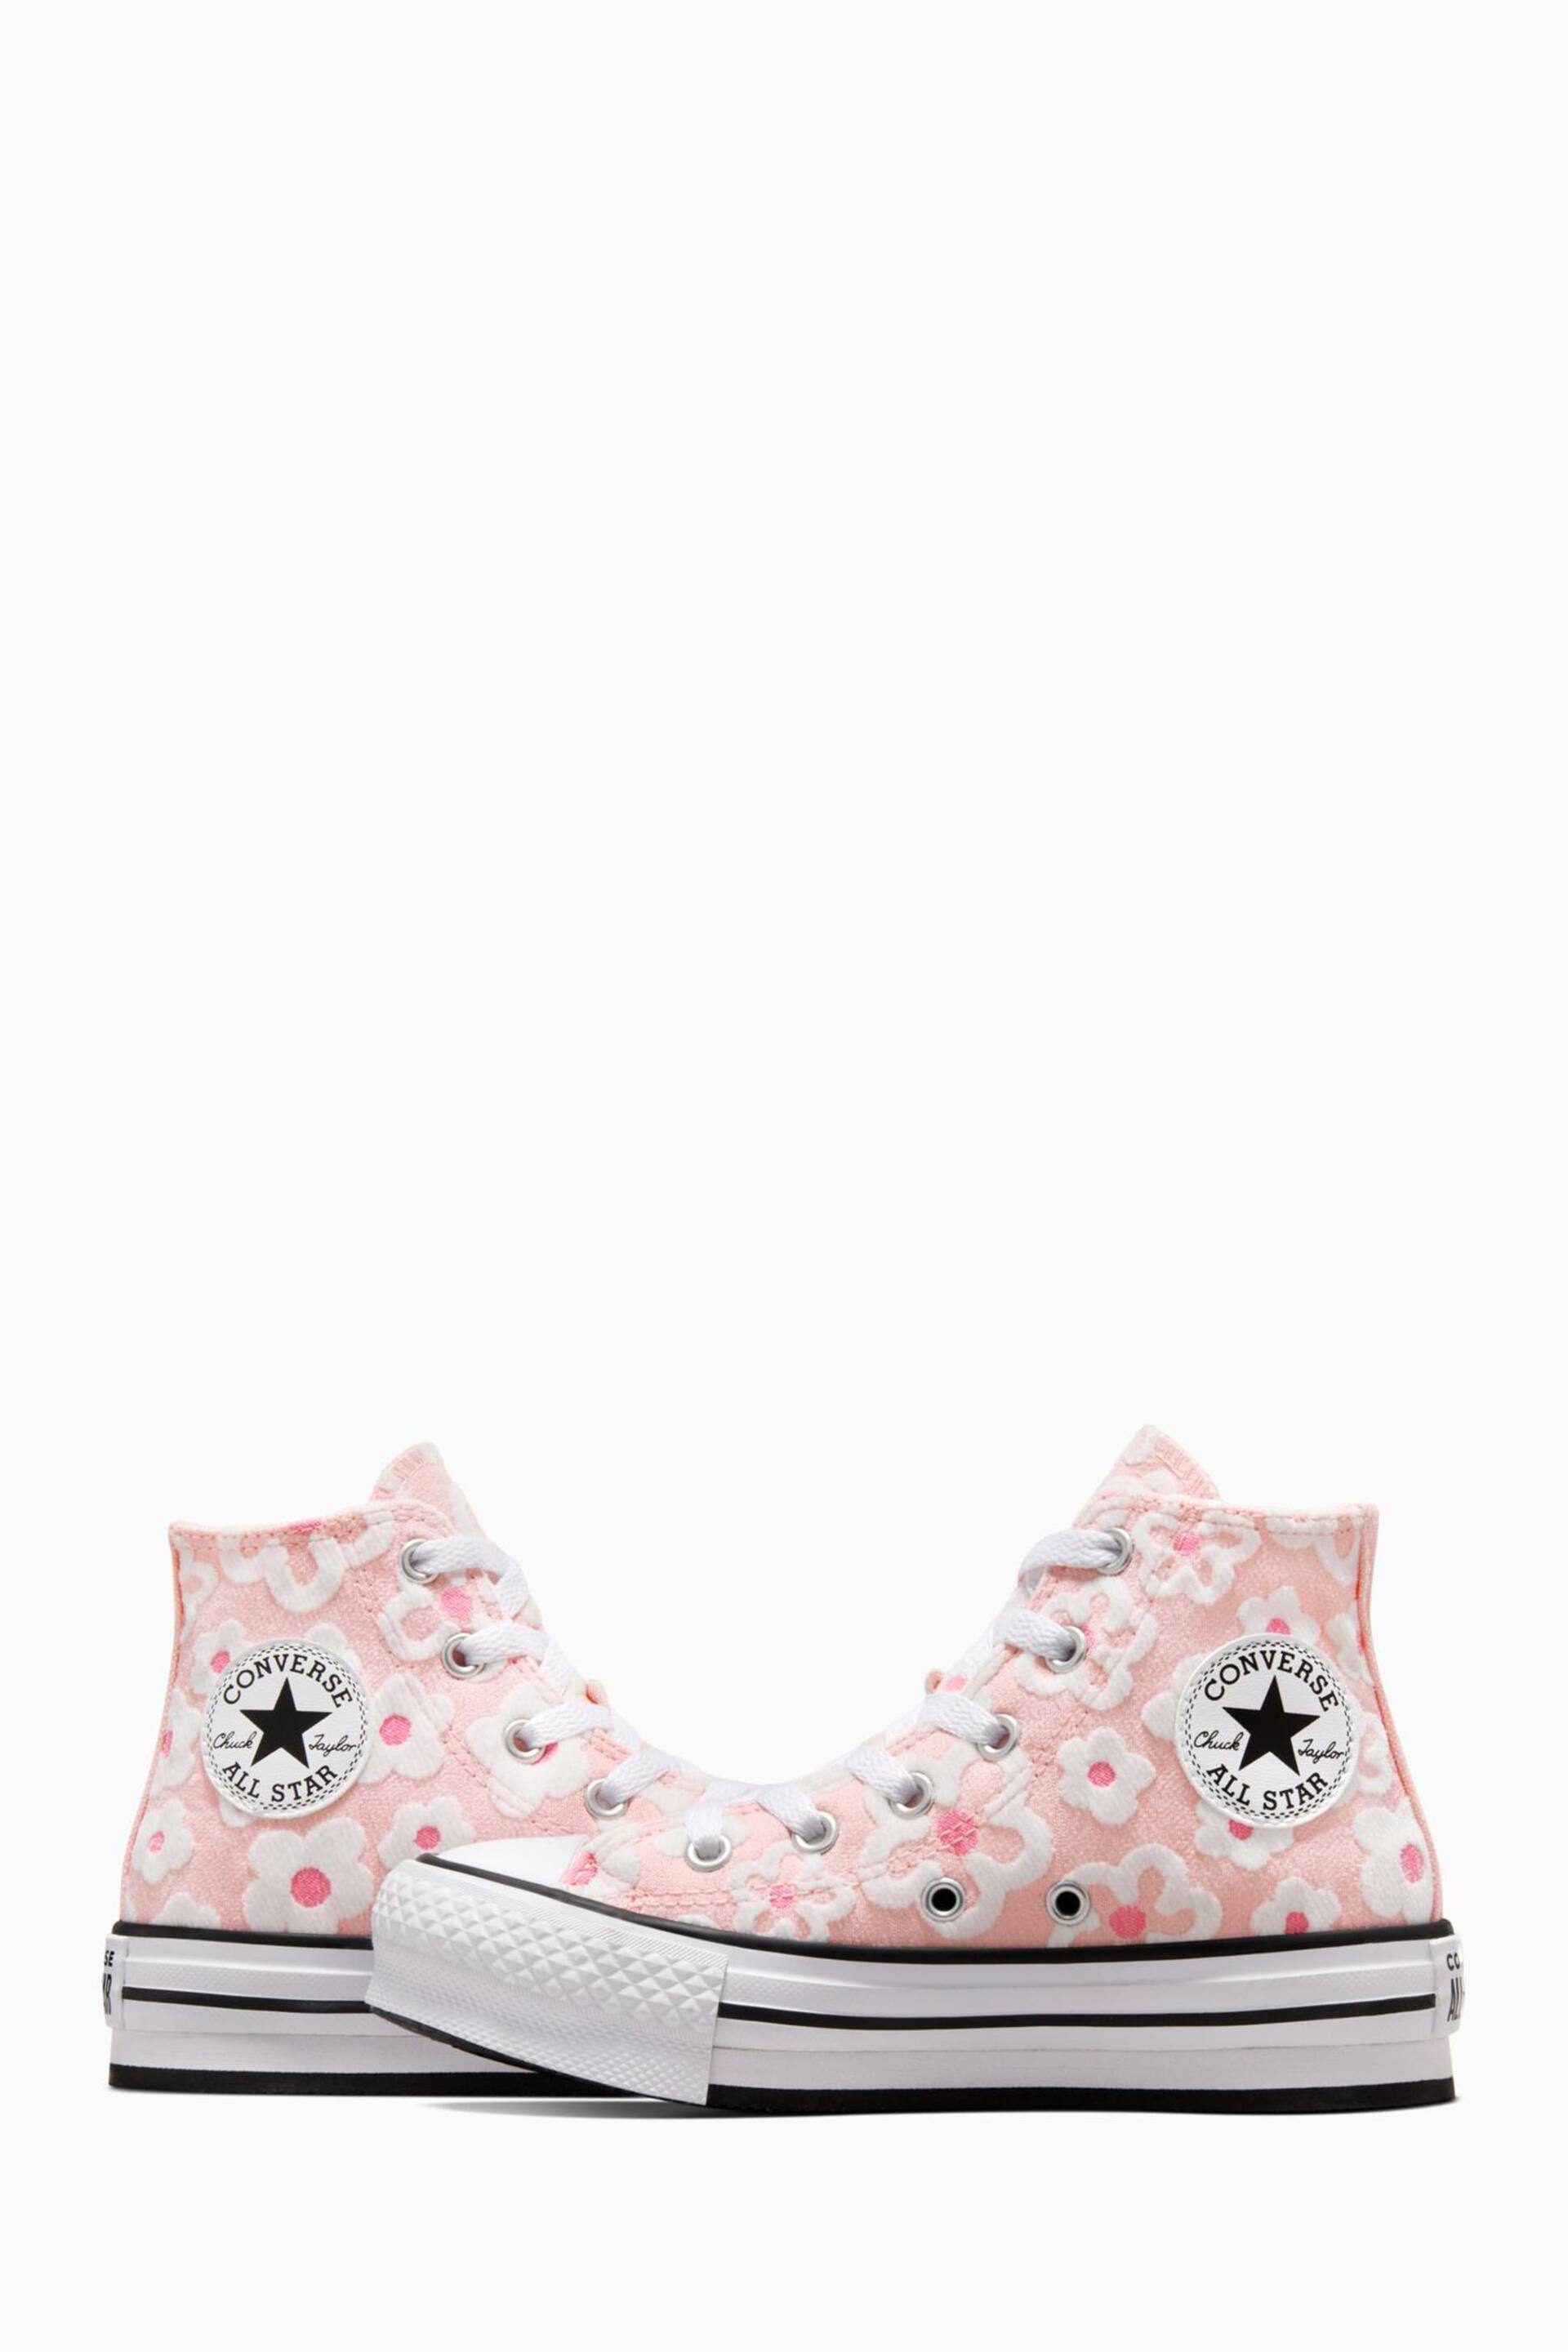 Converse Pink Floral Textured Eva Lift Youth Trainers - Image 6 of 13